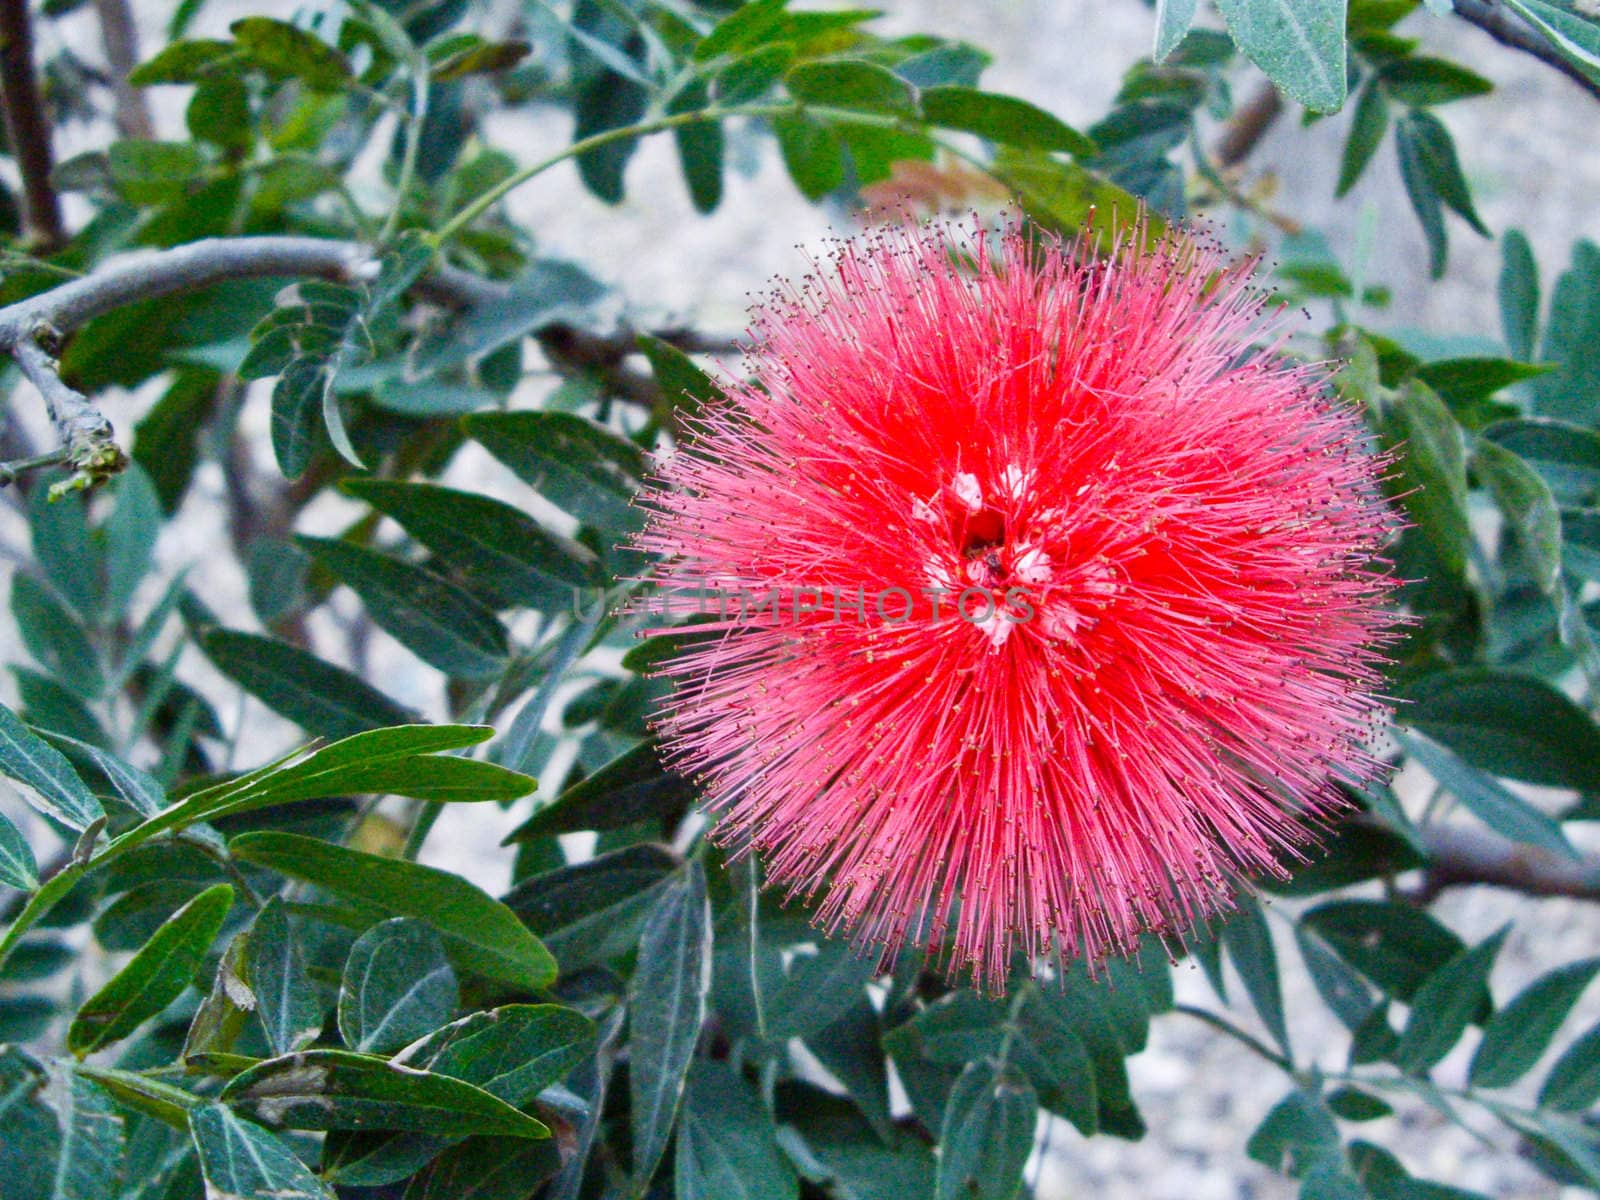 Exoctic red puffball flower against green leaves